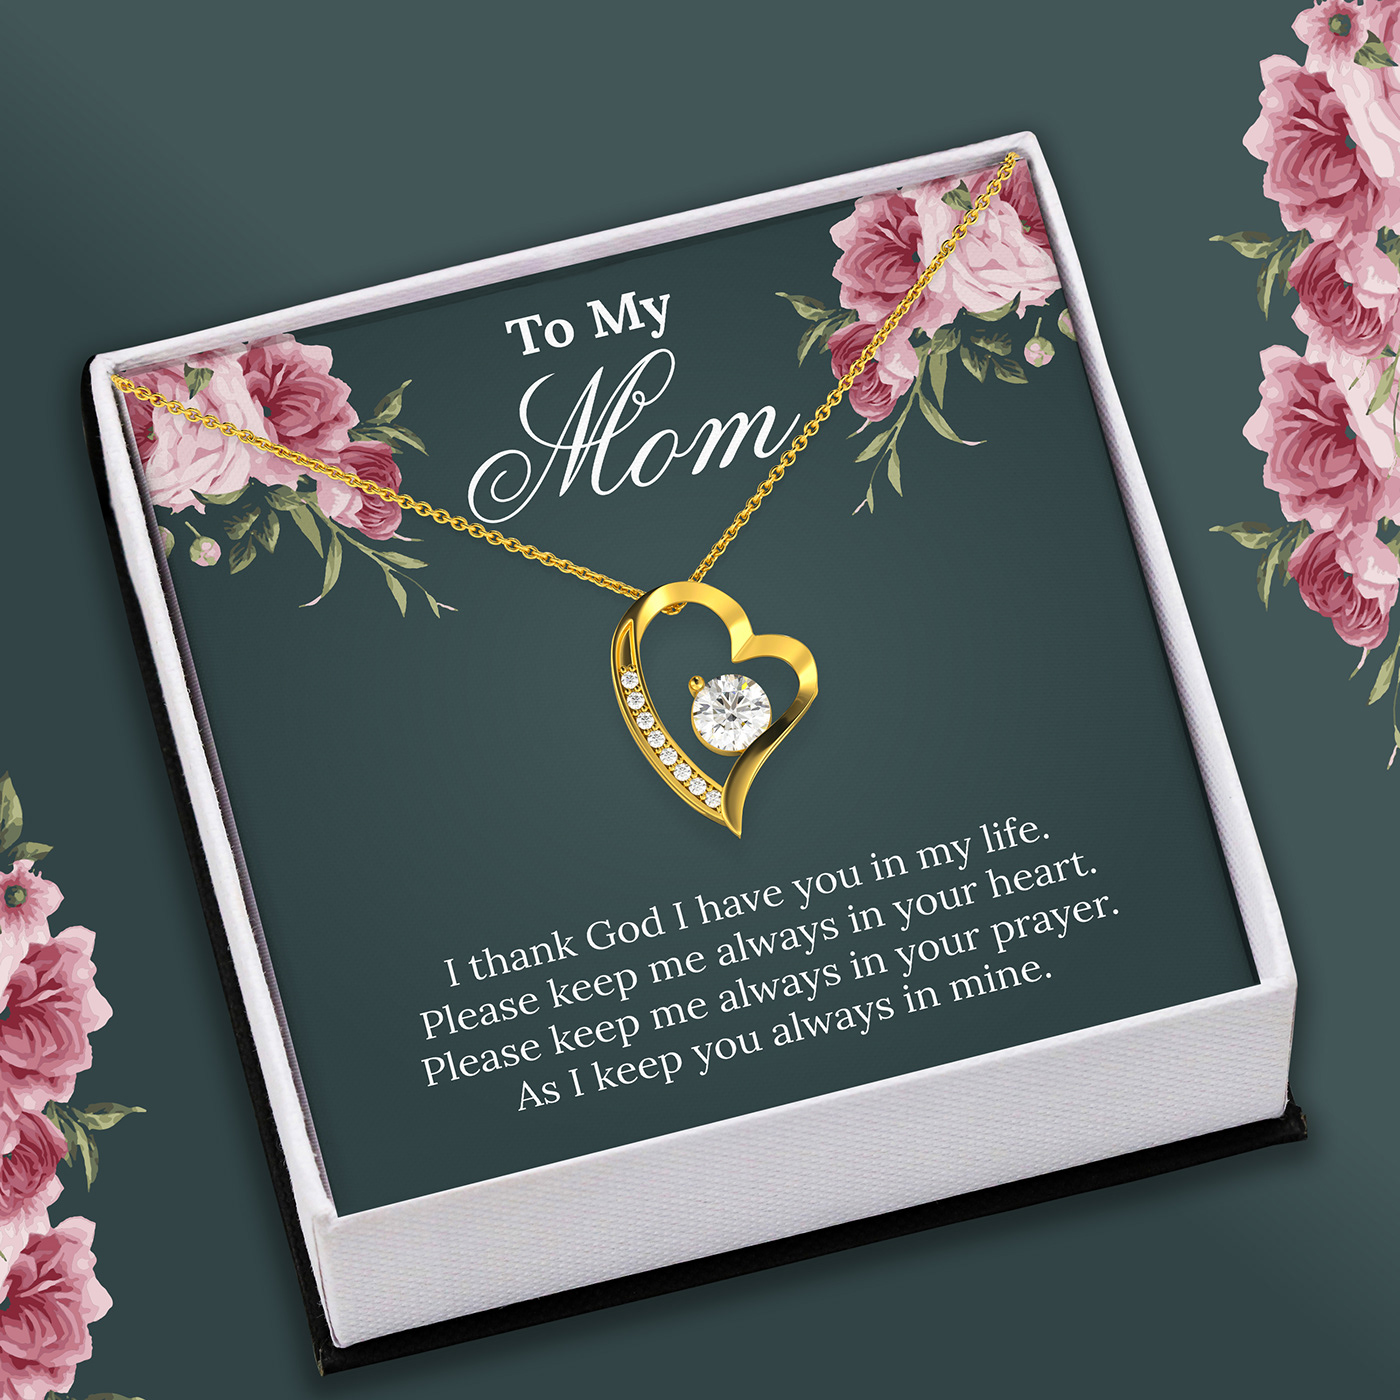 design for mom free download mockup free mockup  message card design mothers day Necklace necklace for mom necklaces design Pendant Design shineon jewelry